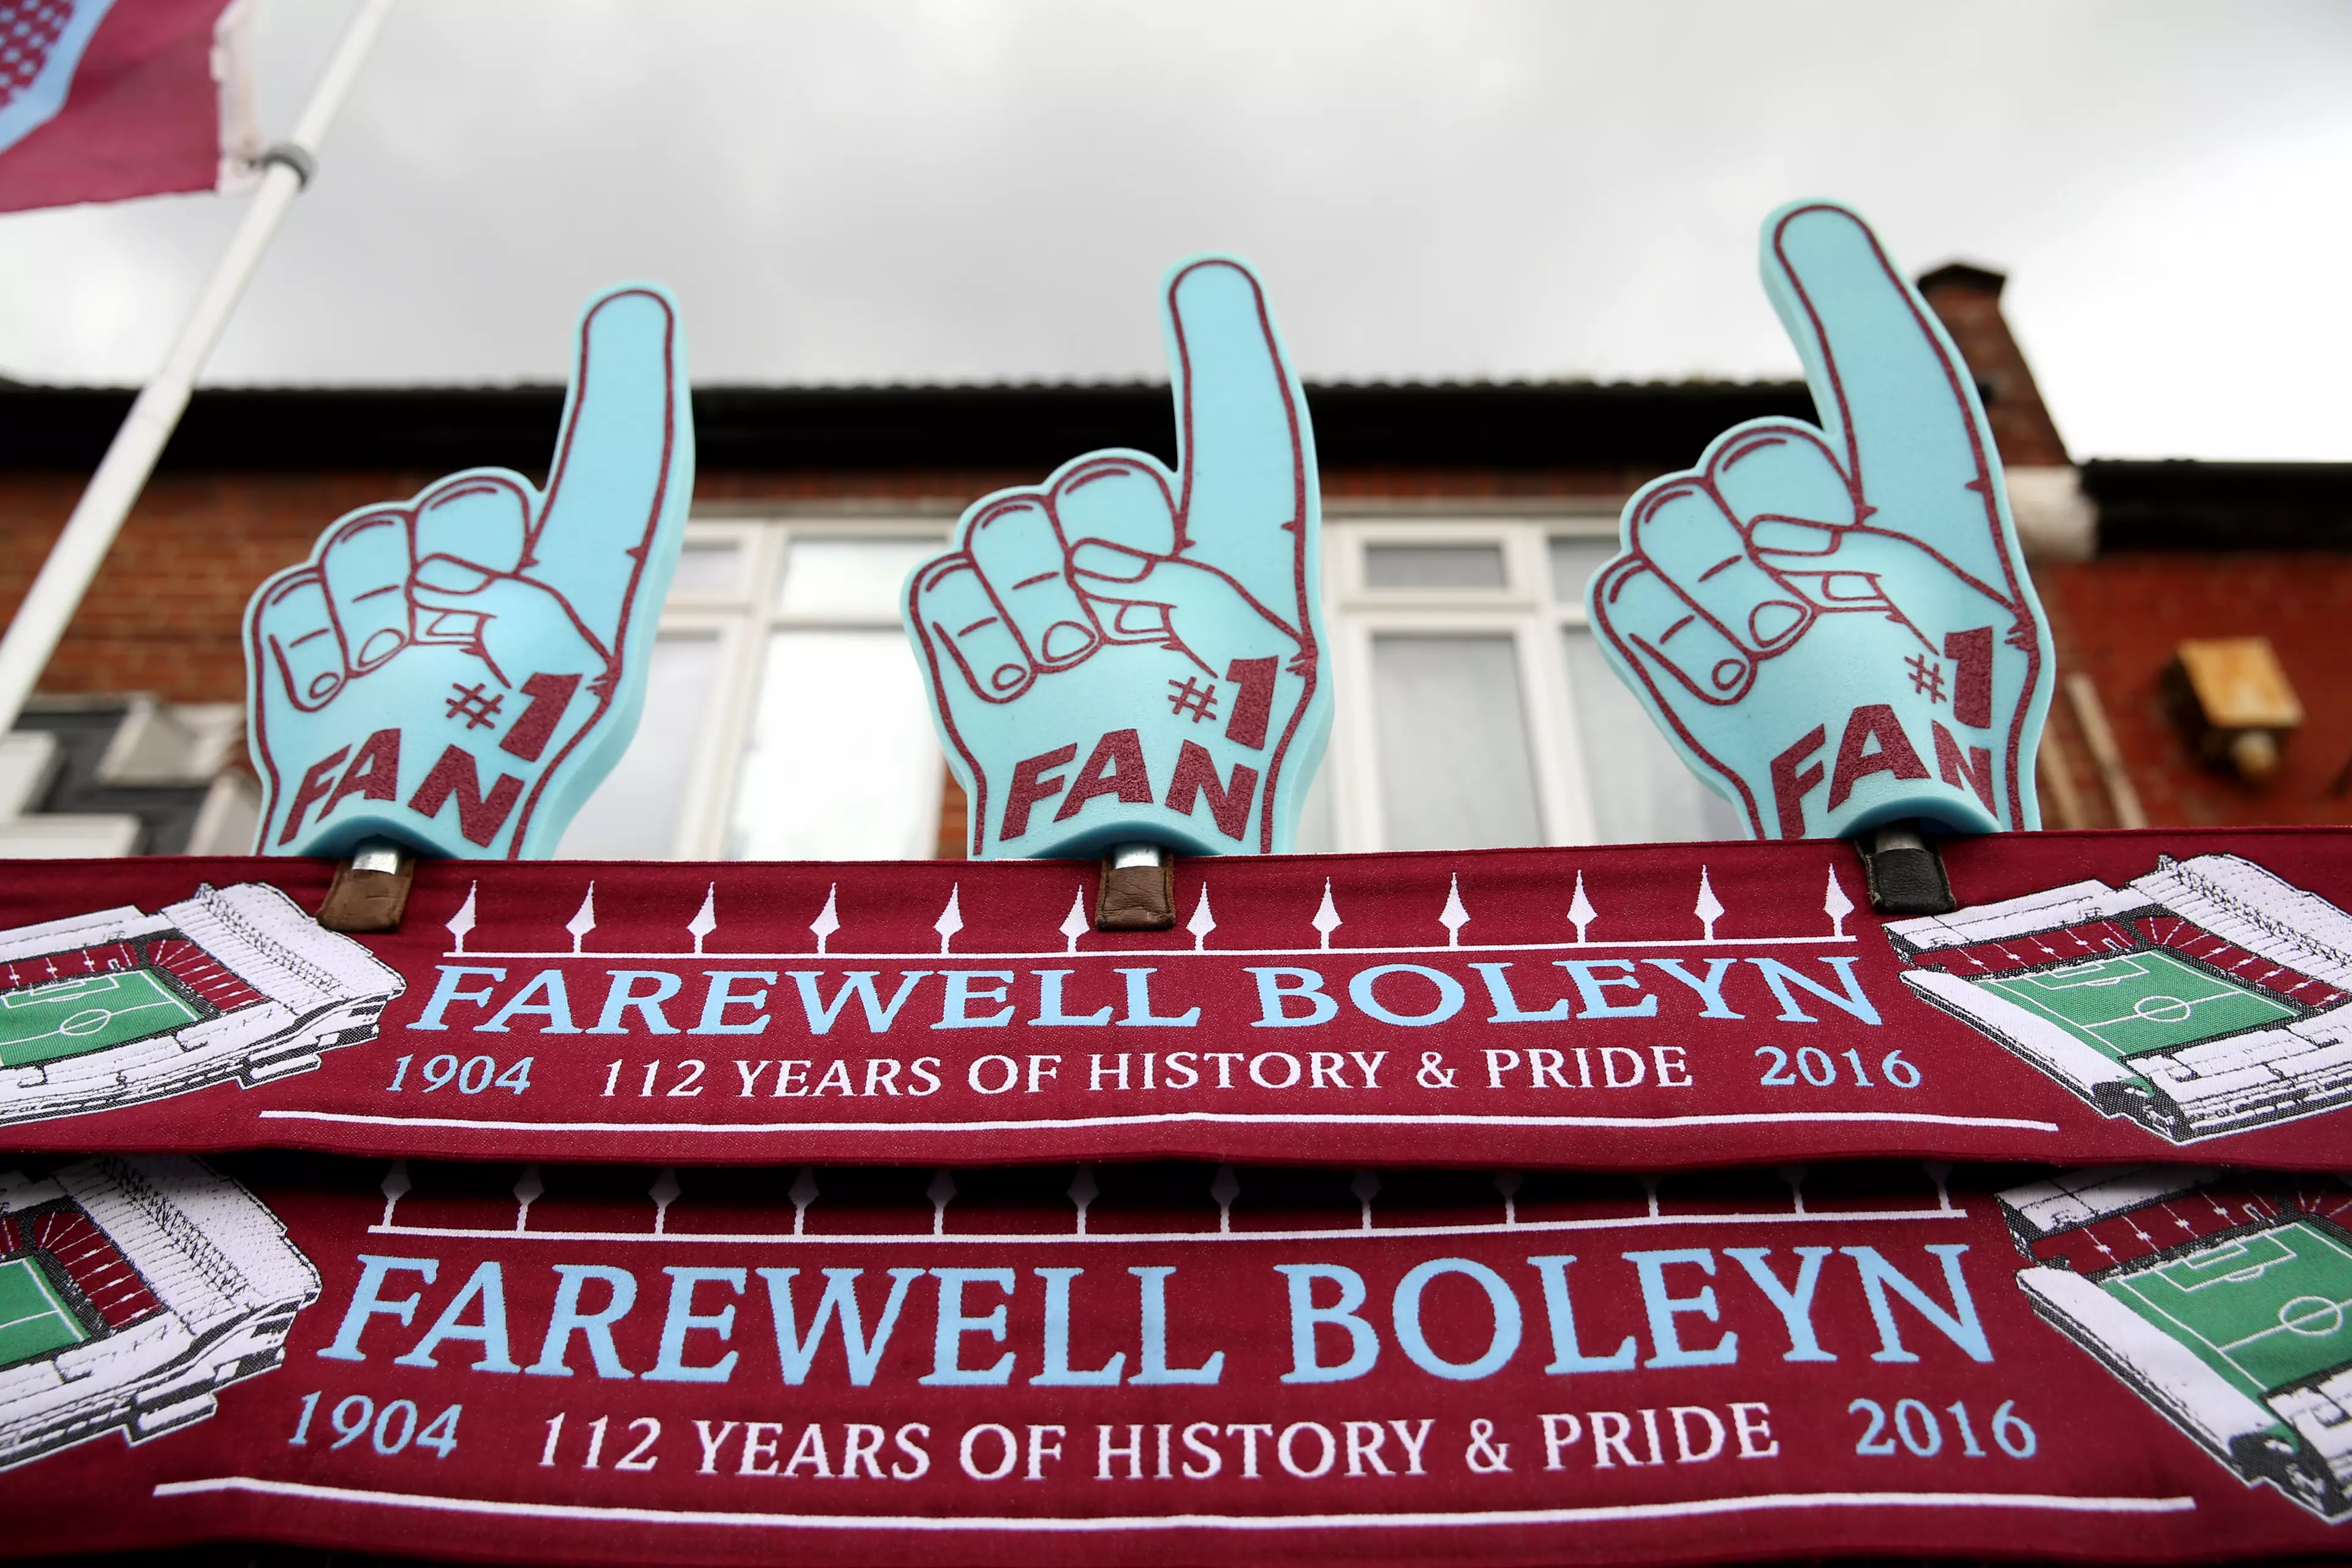 West Ham Have Invited Pretty Much Everyone To Their Last Match At Upton Park